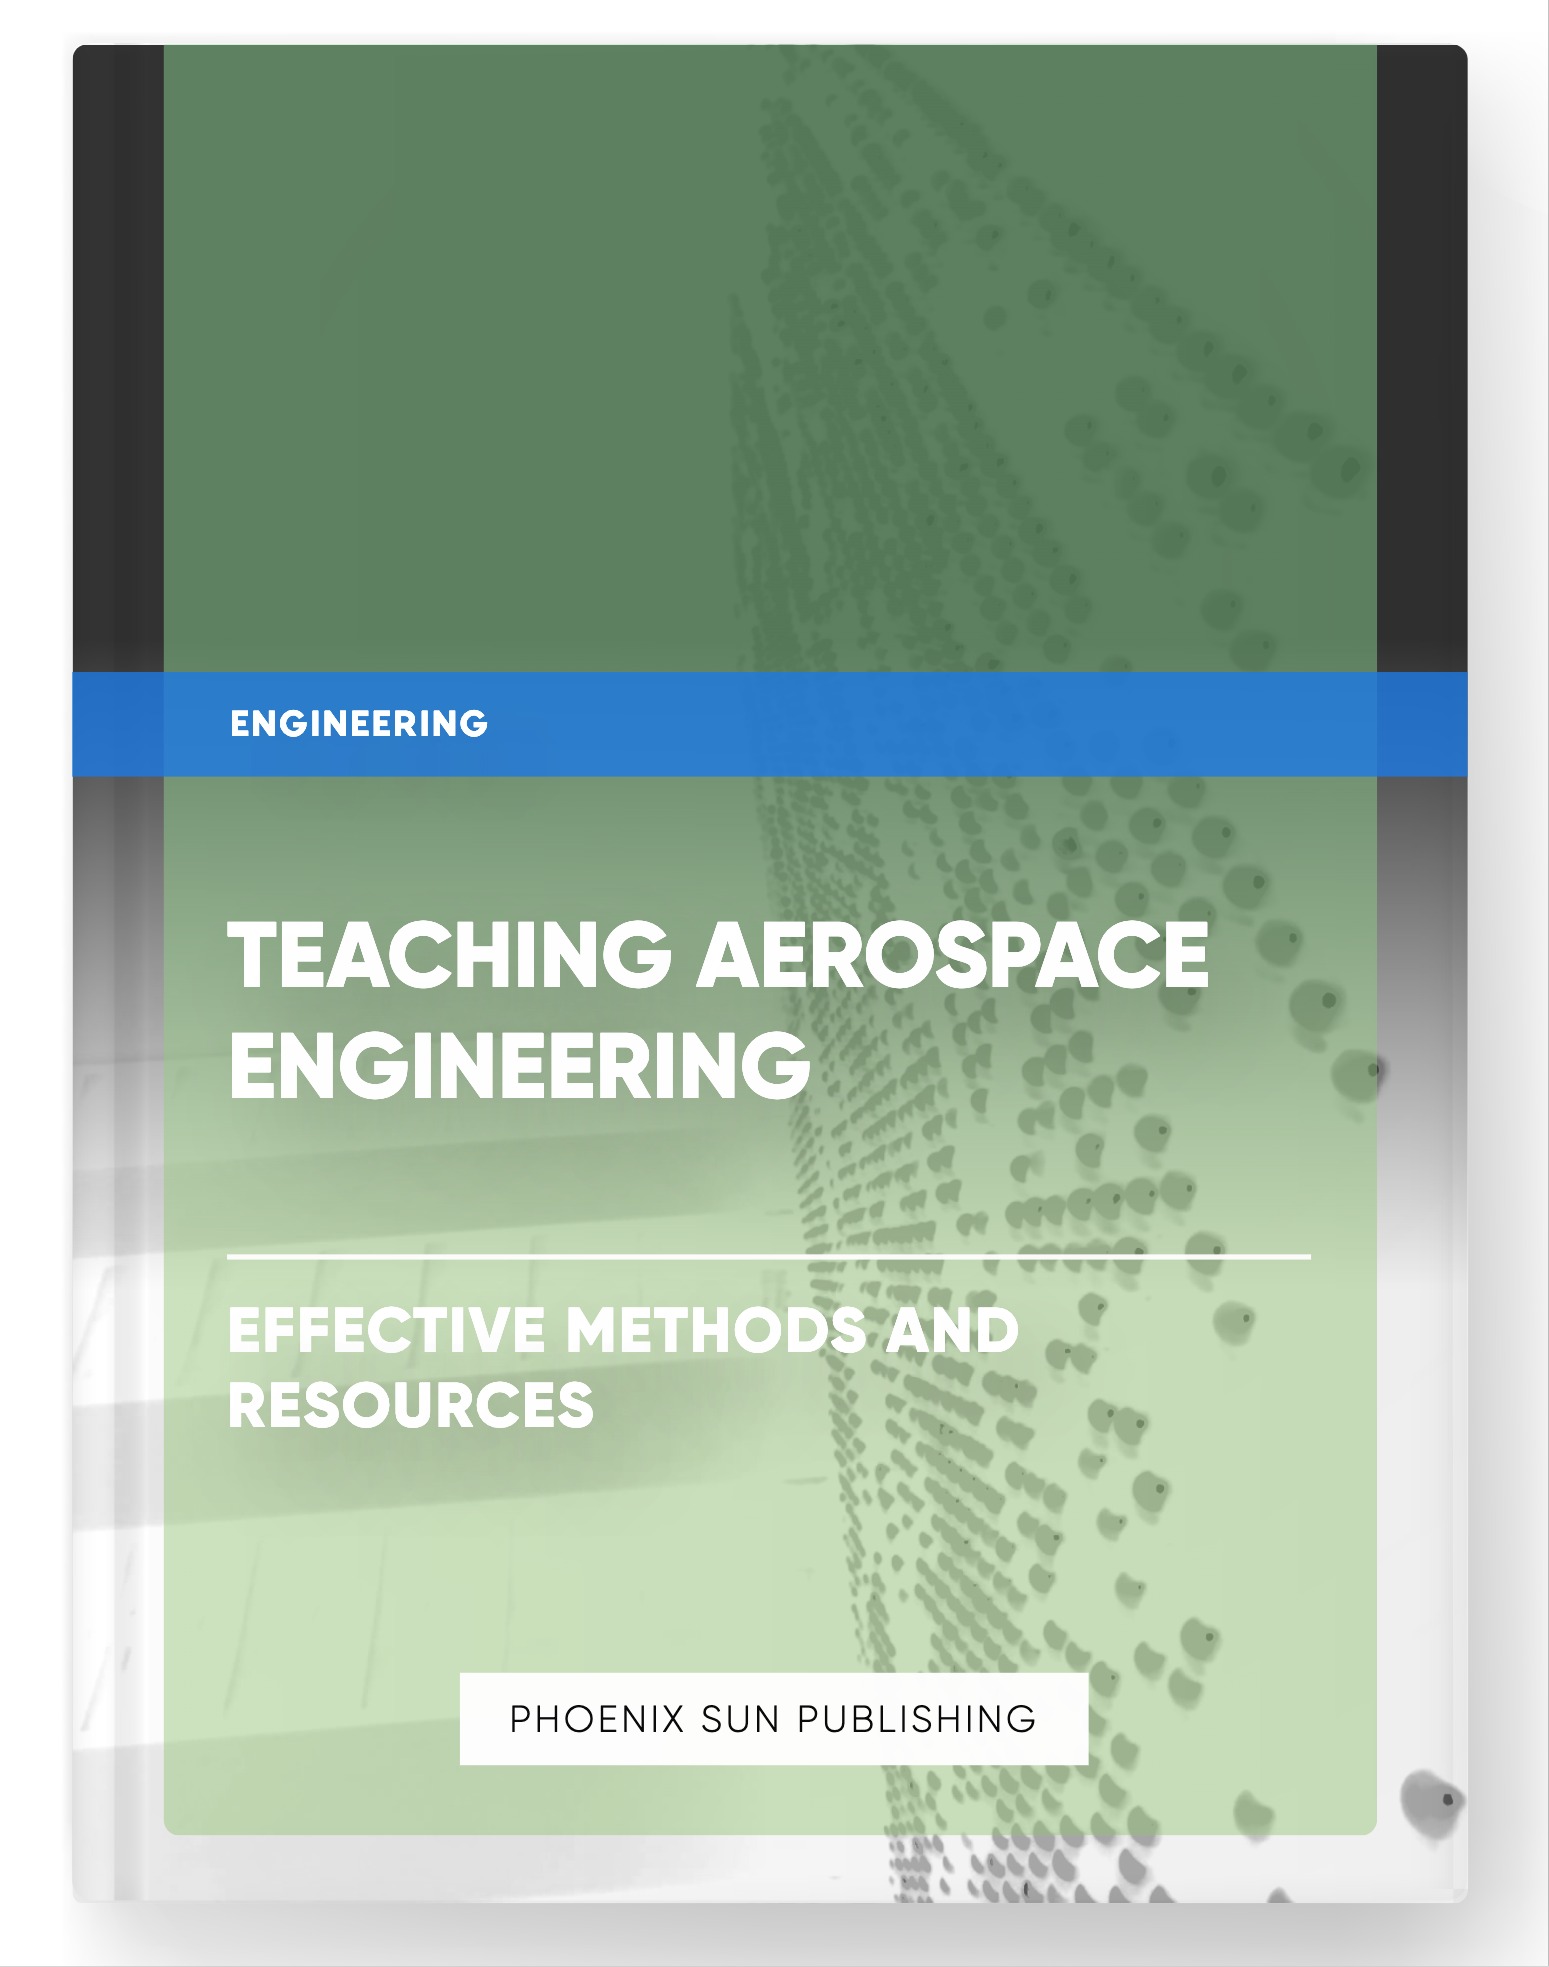 Teaching Aerospace Engineering – Effective Methods and Resources